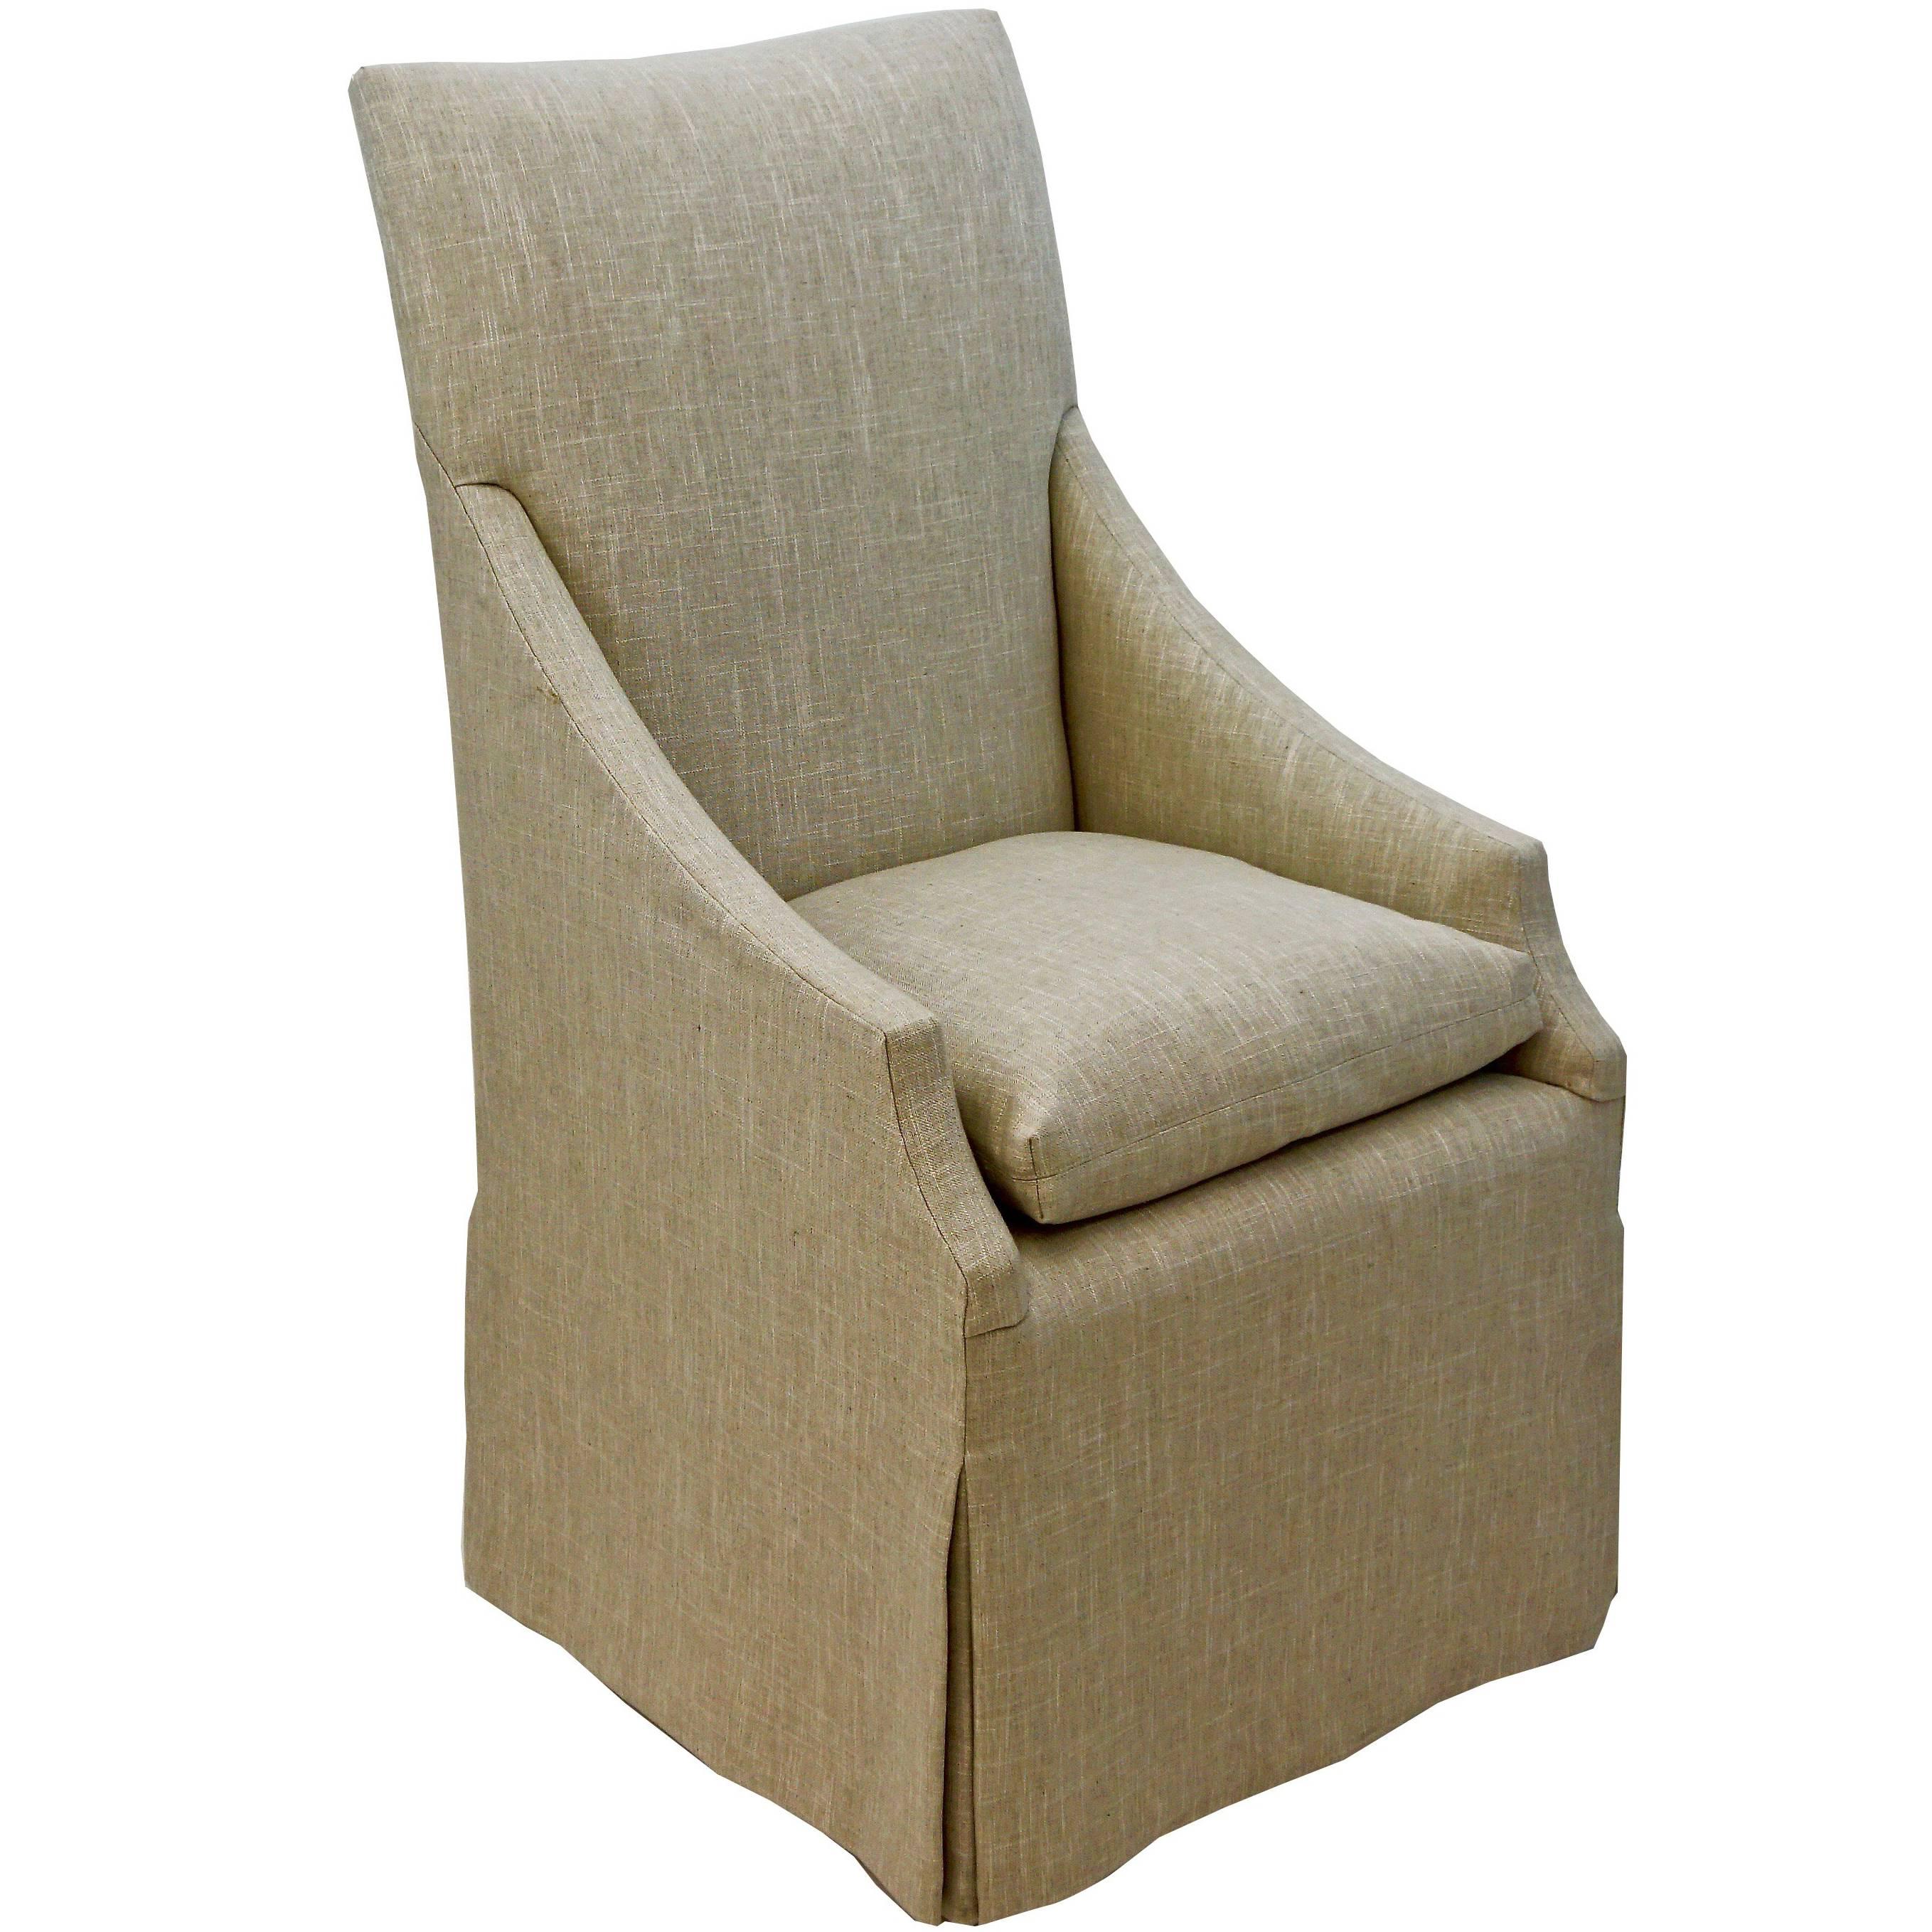 Customizable Slope Armchair with High Back and Skirt For Sale